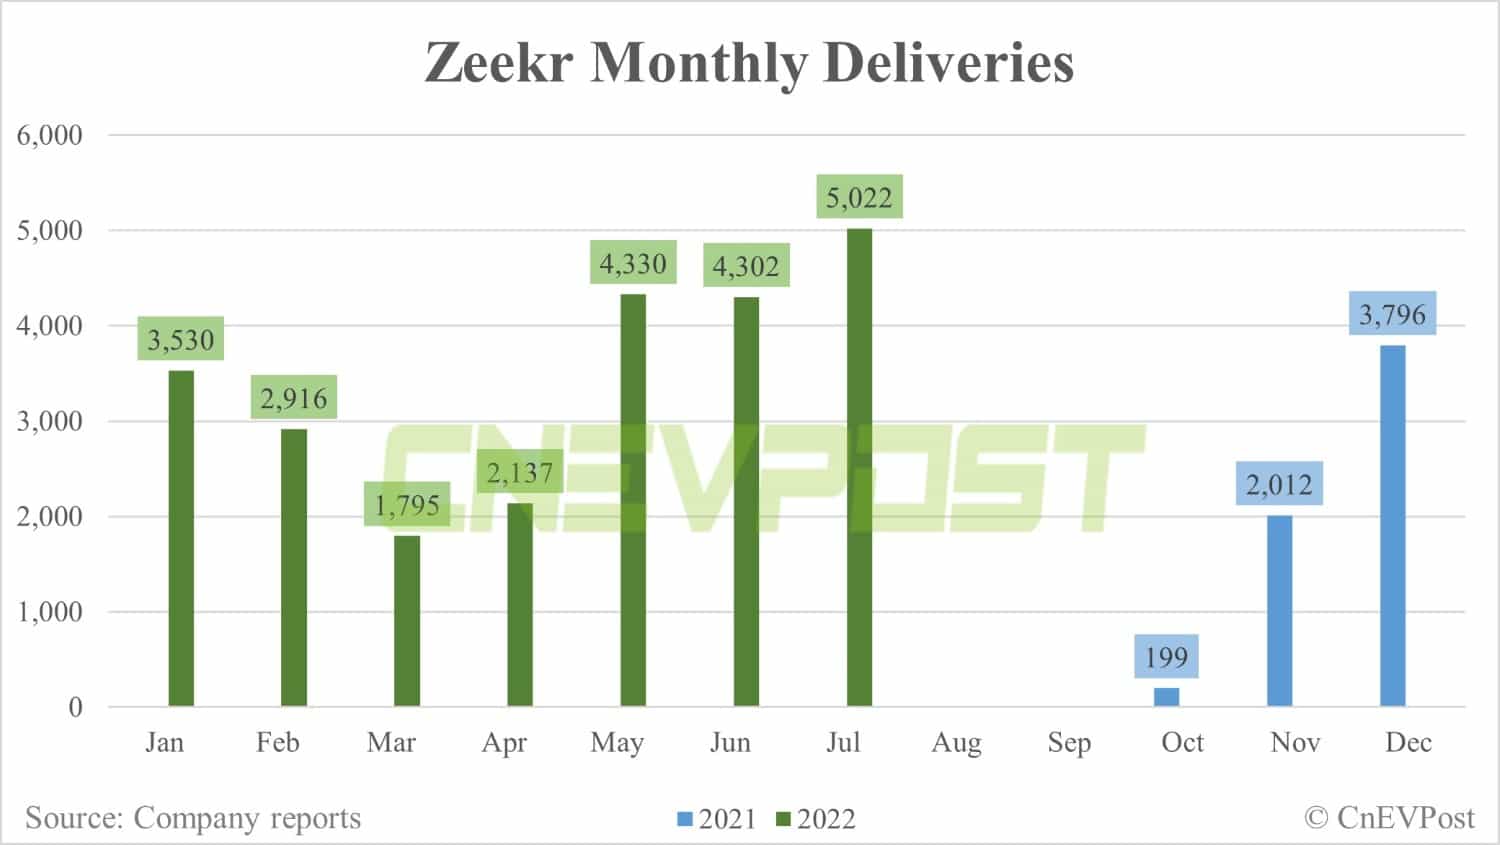 Zeekr delivers 5,022 units in July, up about 17% from June-CnEVPost